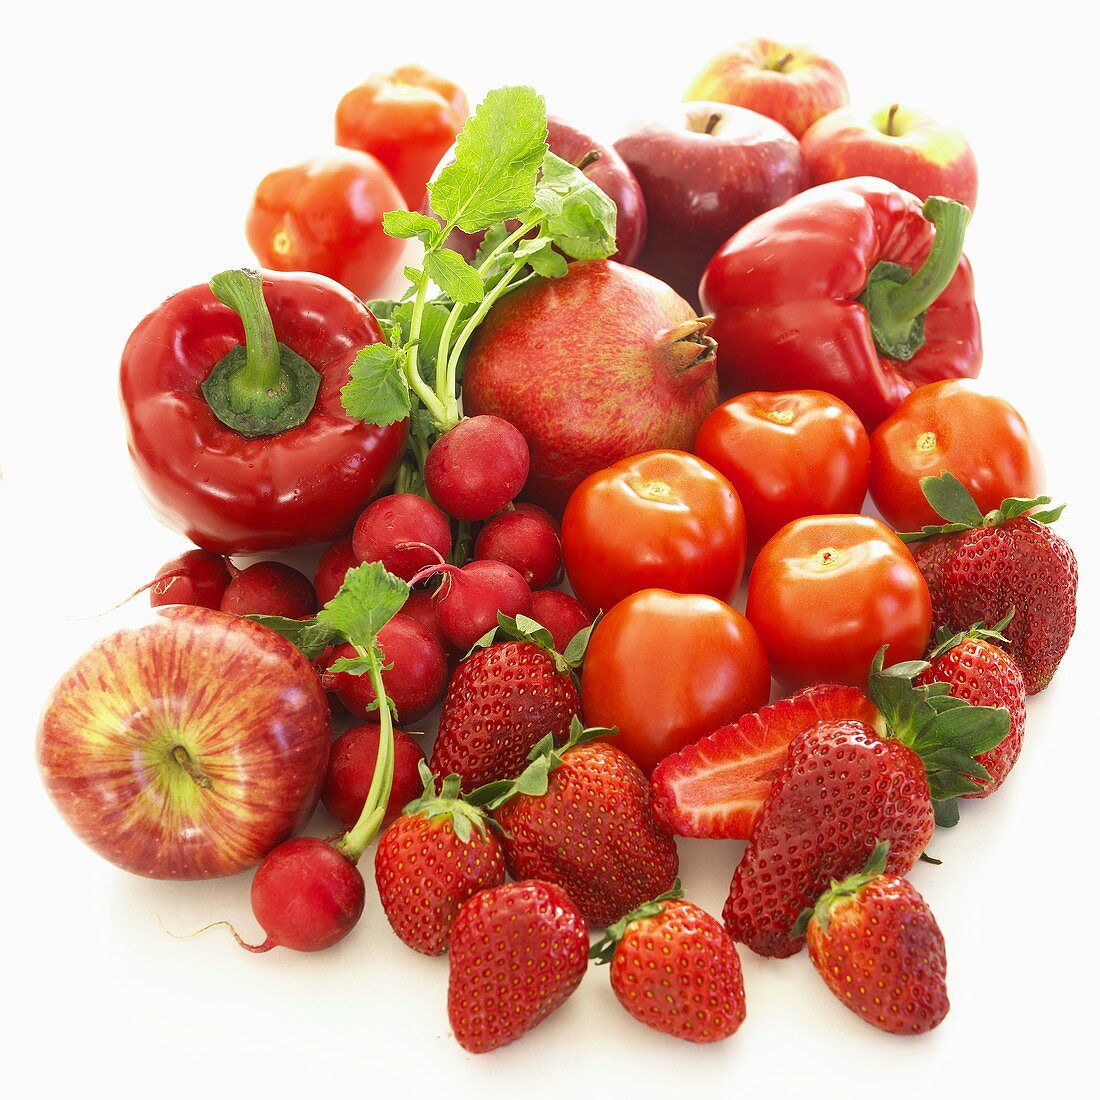 Five-a-day: red fruit and vegetables